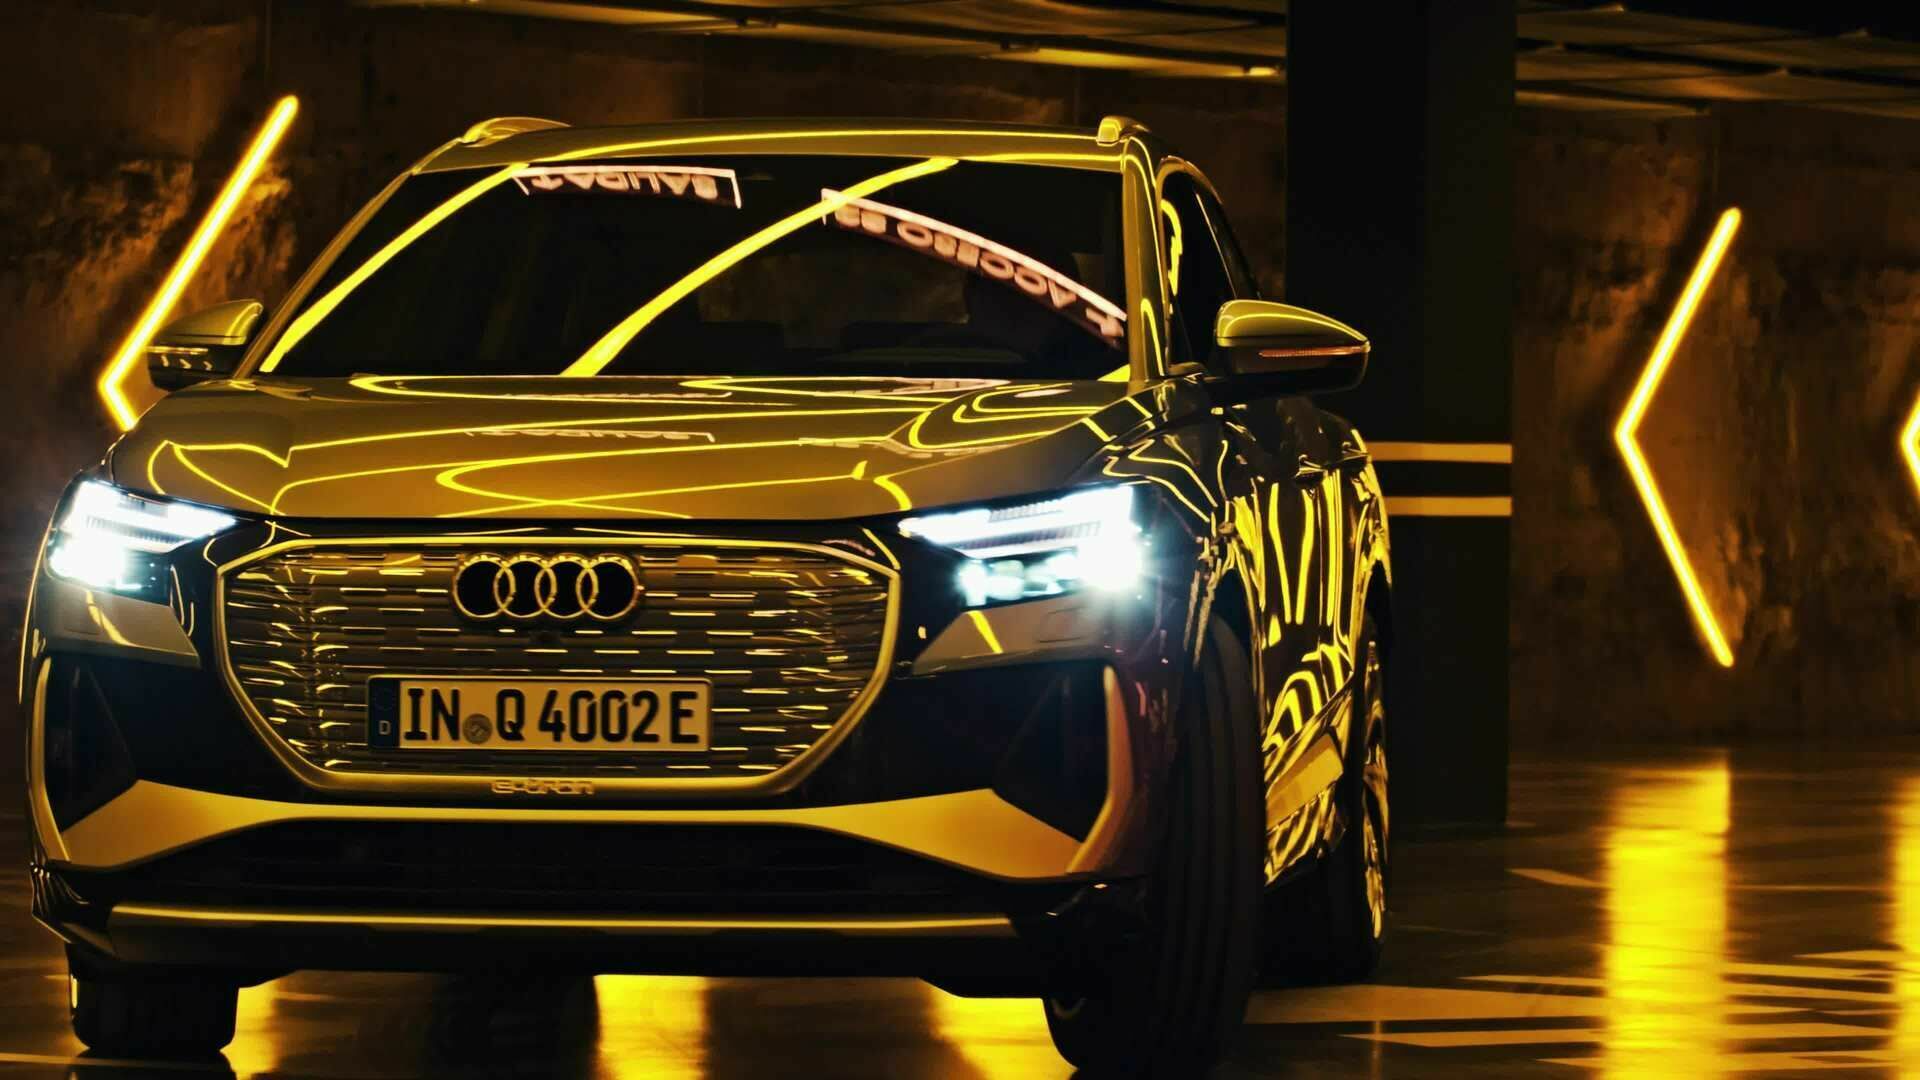 Electrifying: the online world premiere of the Audi Q4 e-tron